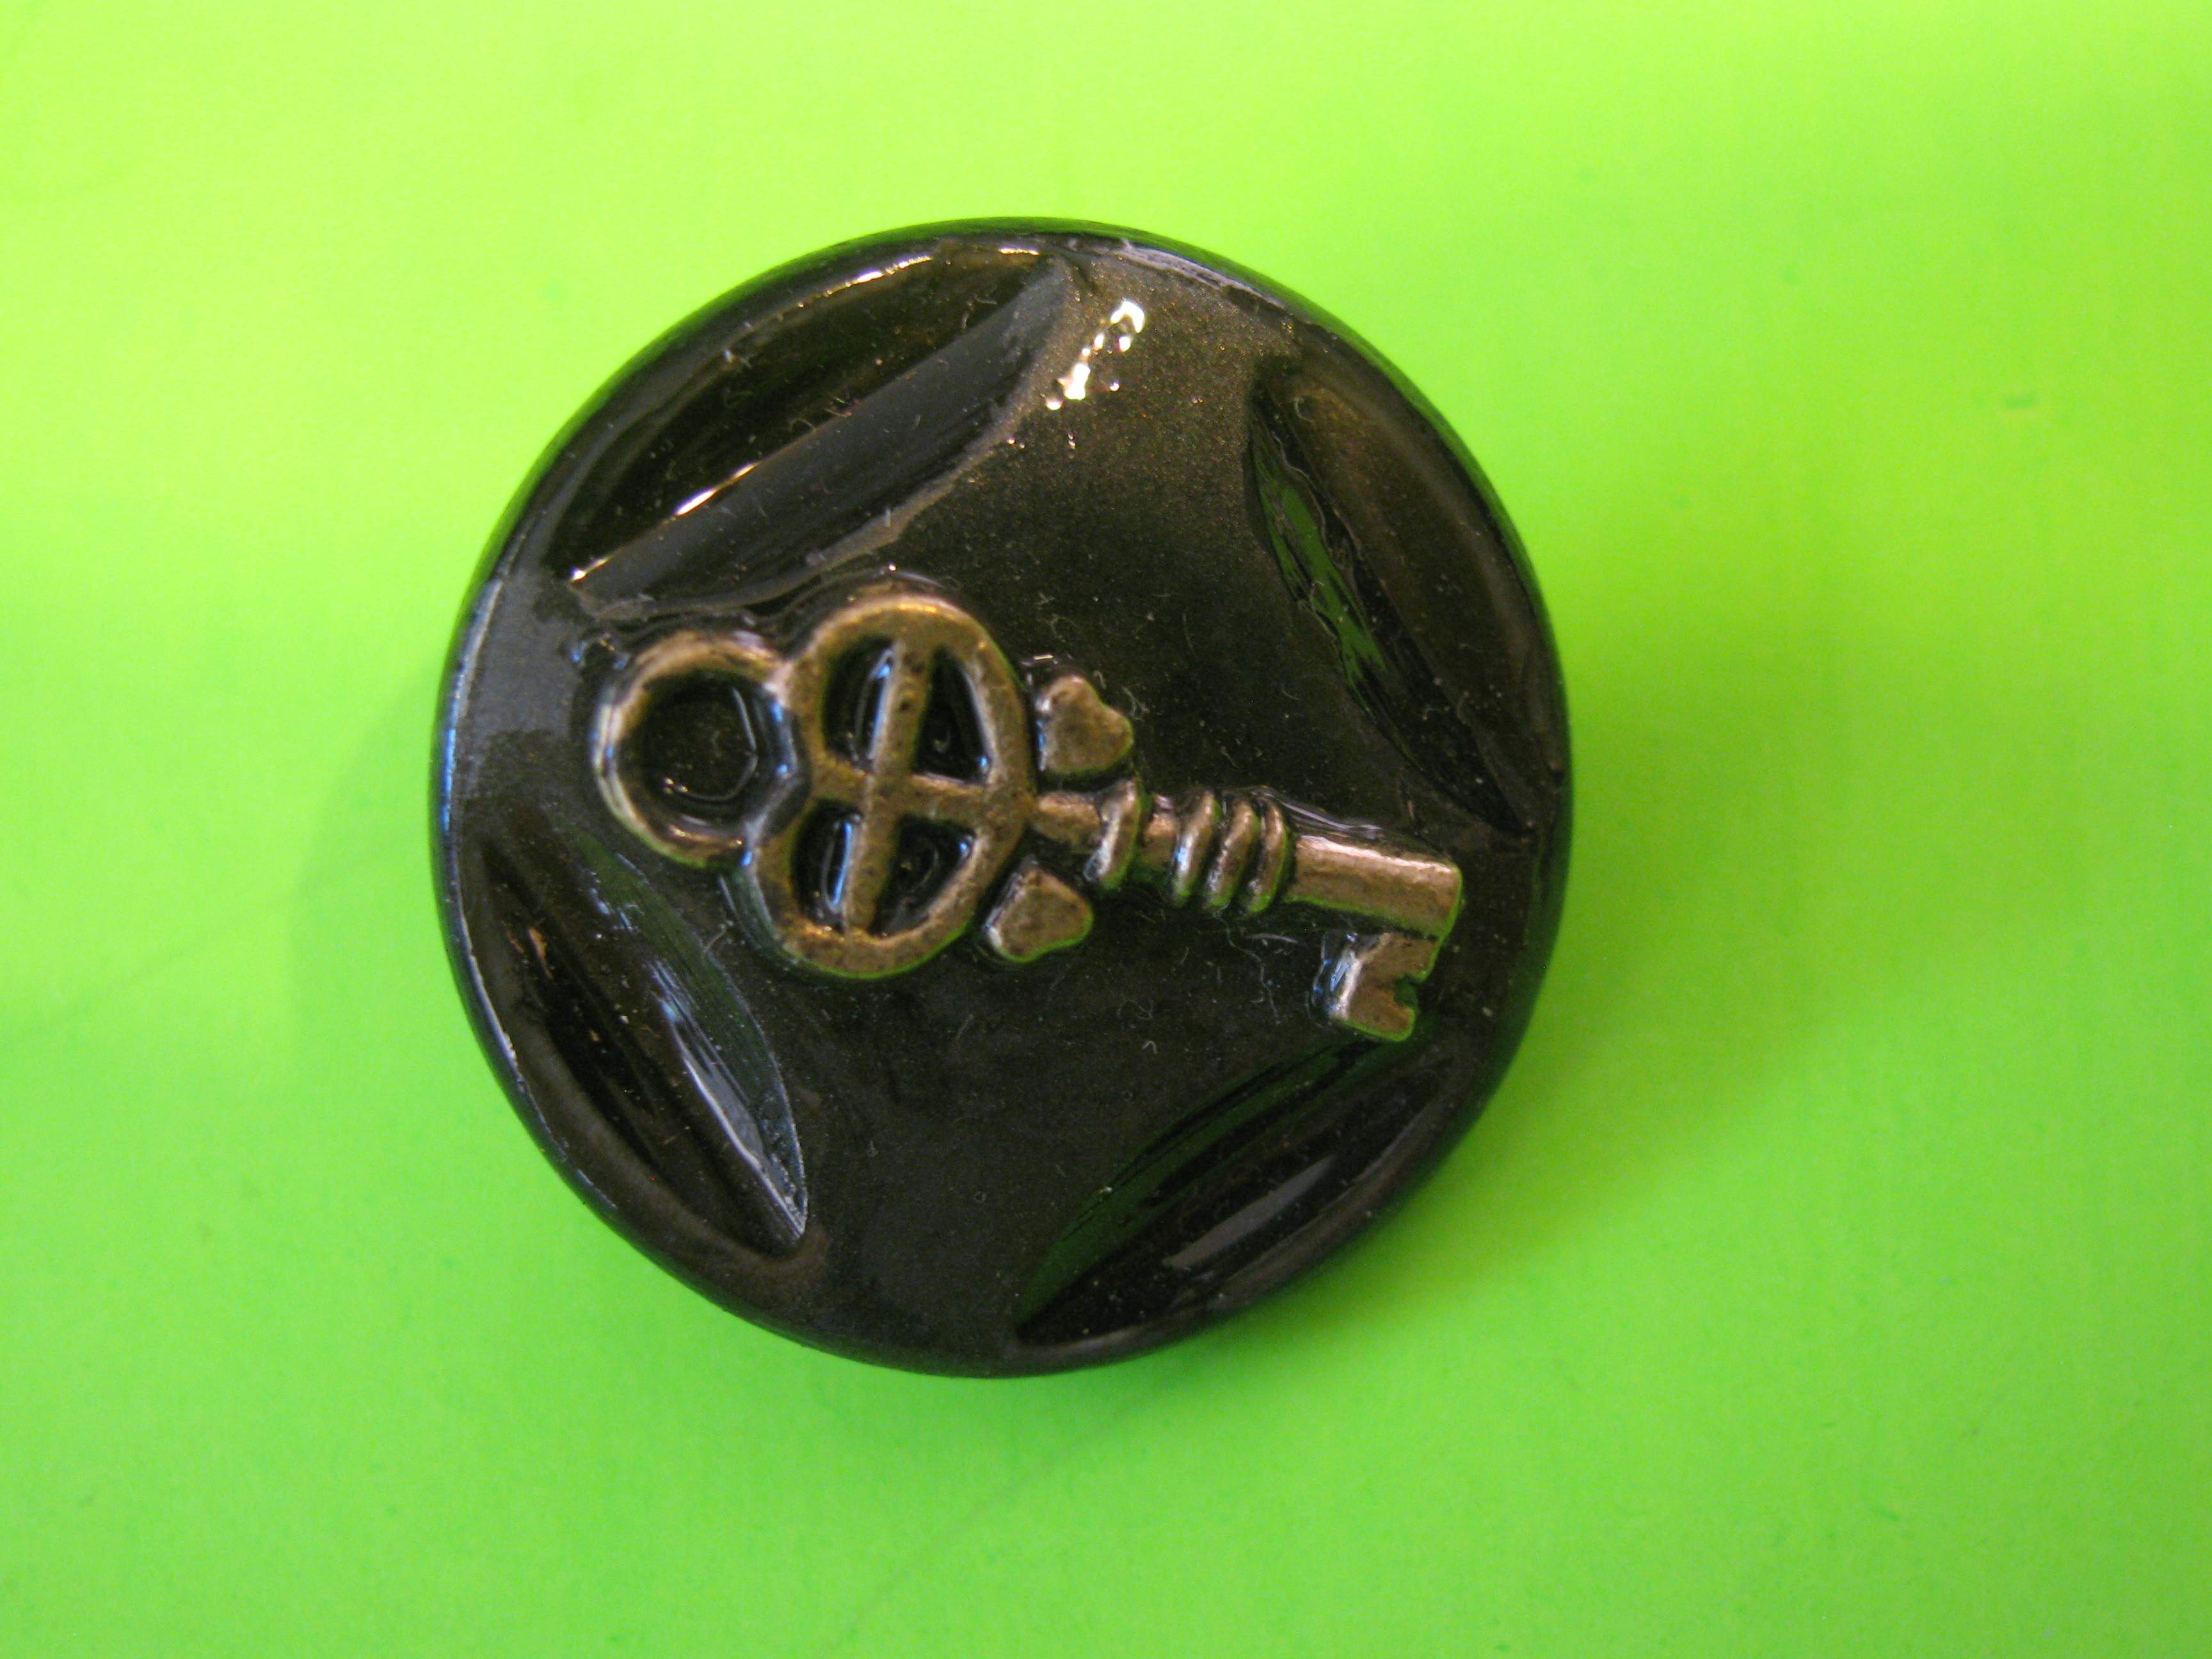 Antique Skeleton Key Centered on Round Mother of Pearl Button with Metal Loop Shank